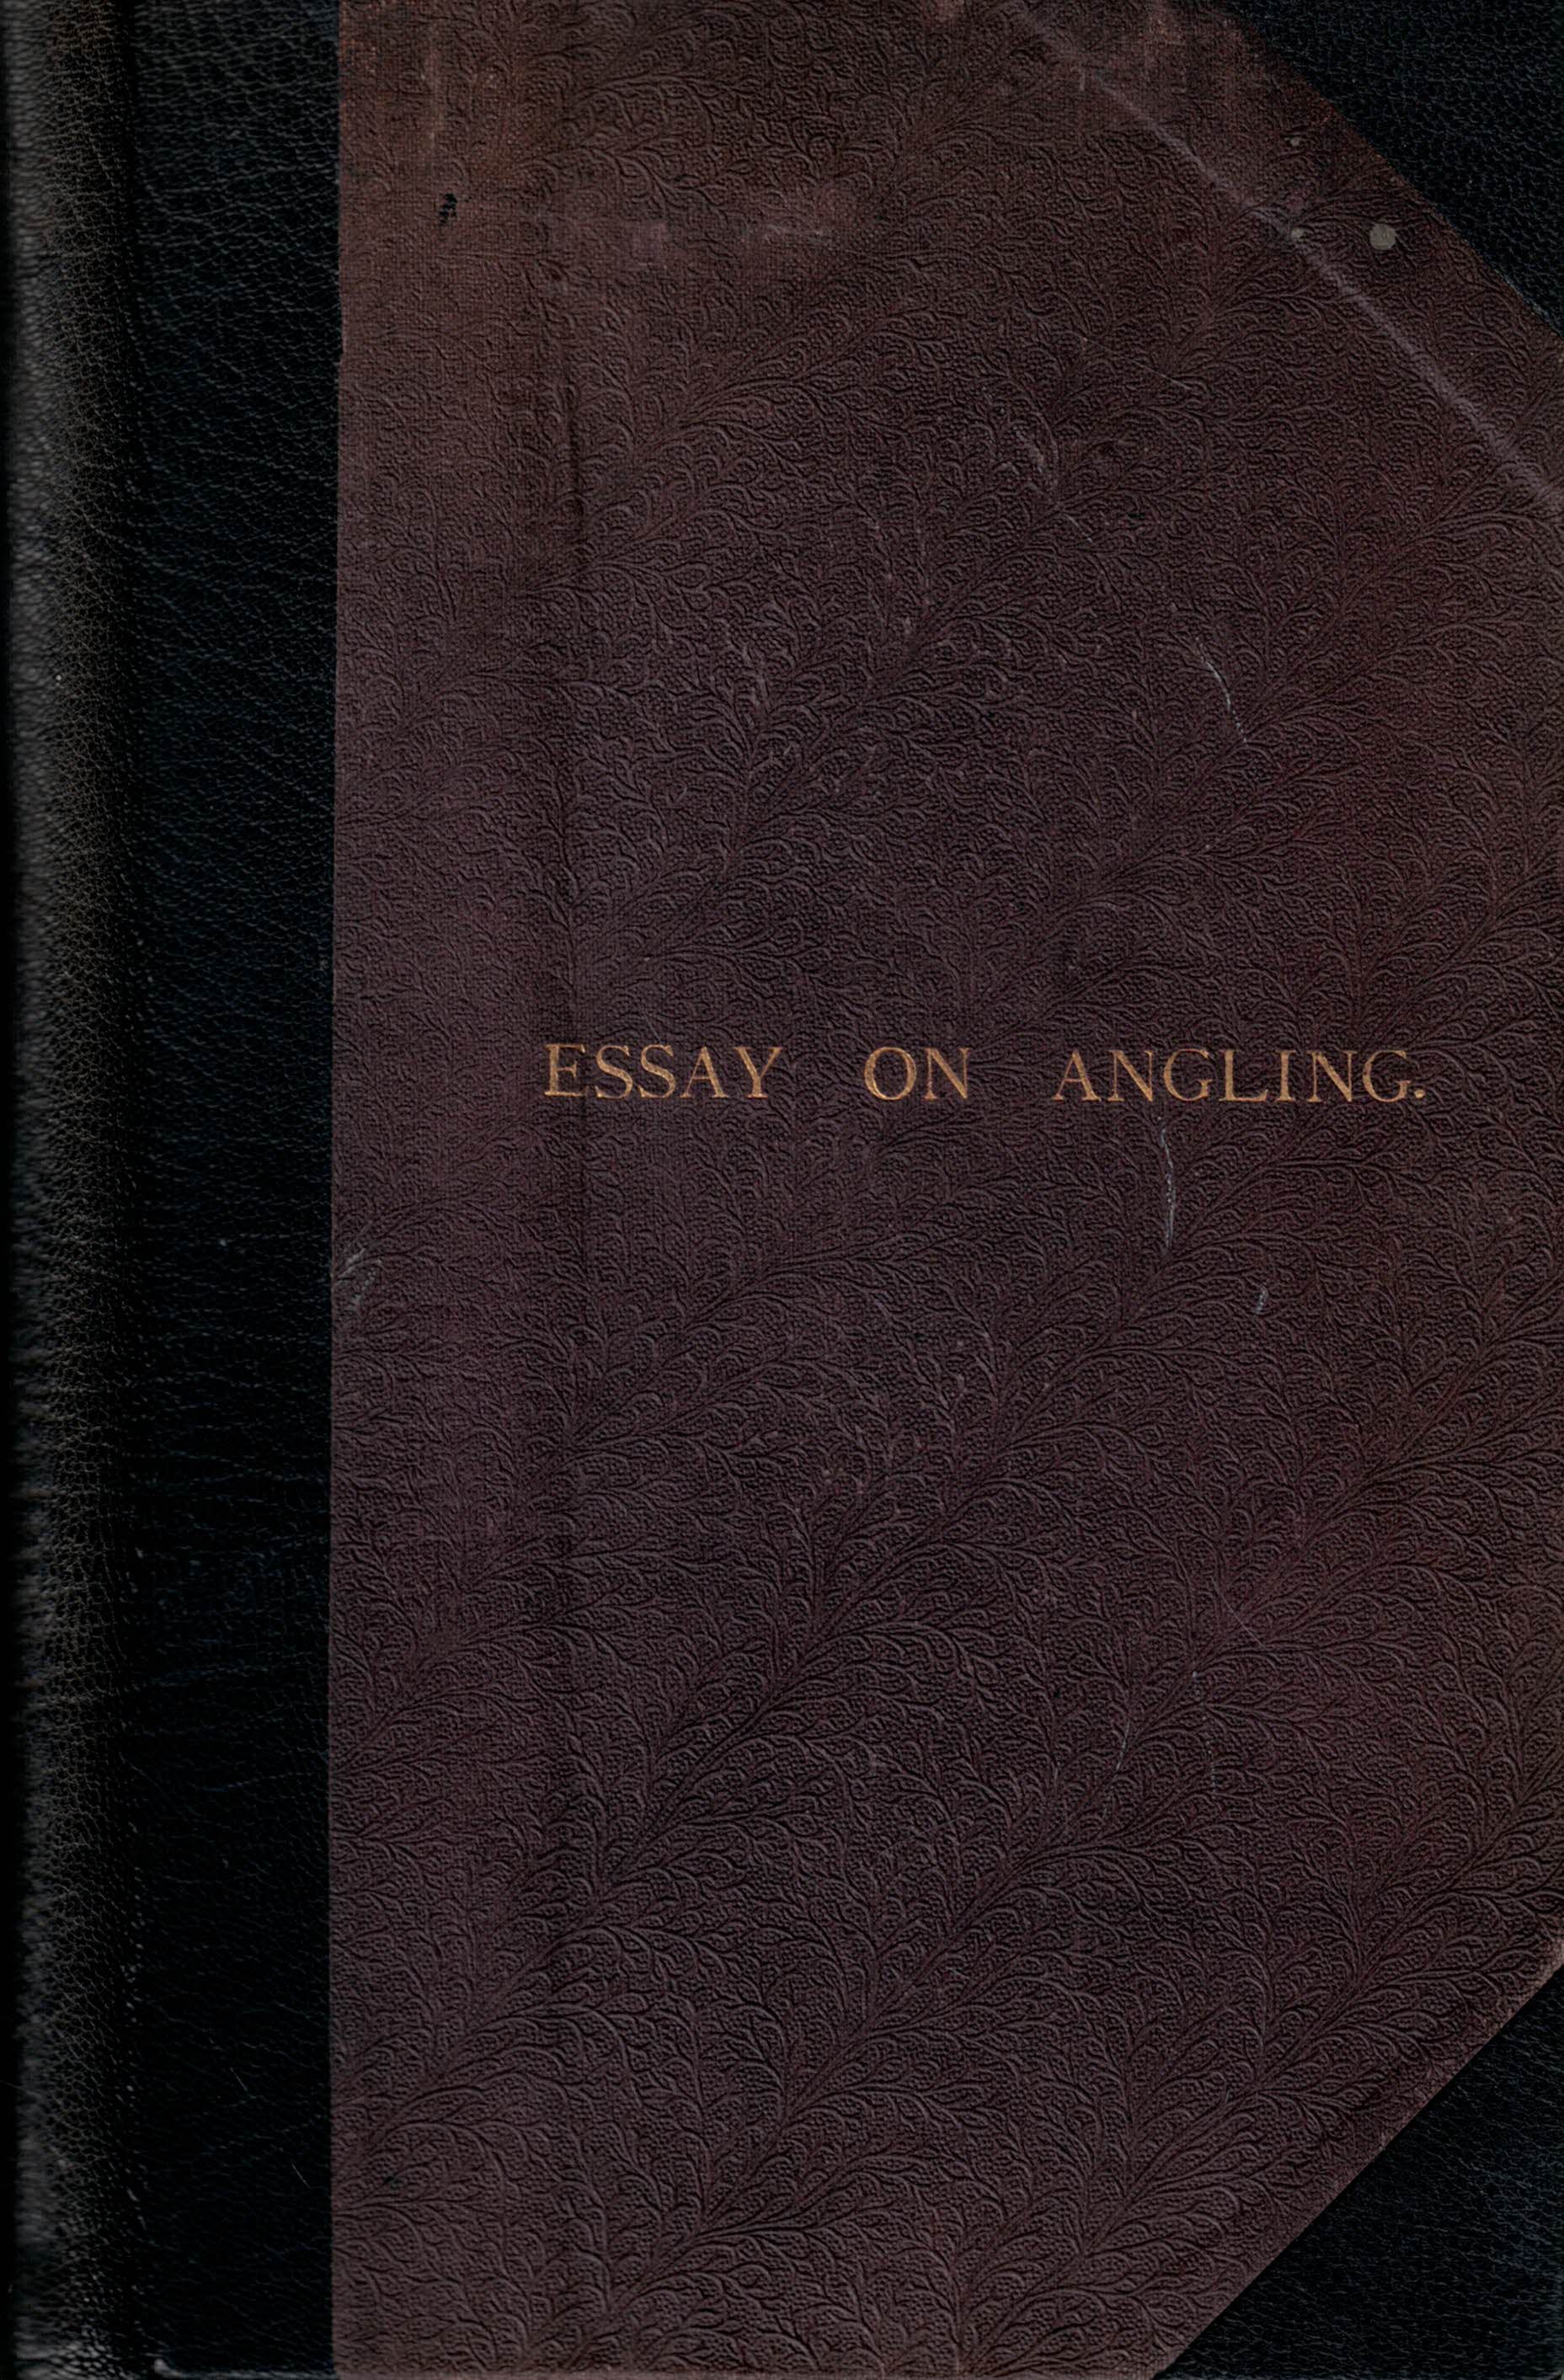 An Essay on The Right of Angling in The River Thames, And in All Other Public Navigable Rivers. In Which The Public Right to Angle in All Such Rivers, is Stated and Proved.